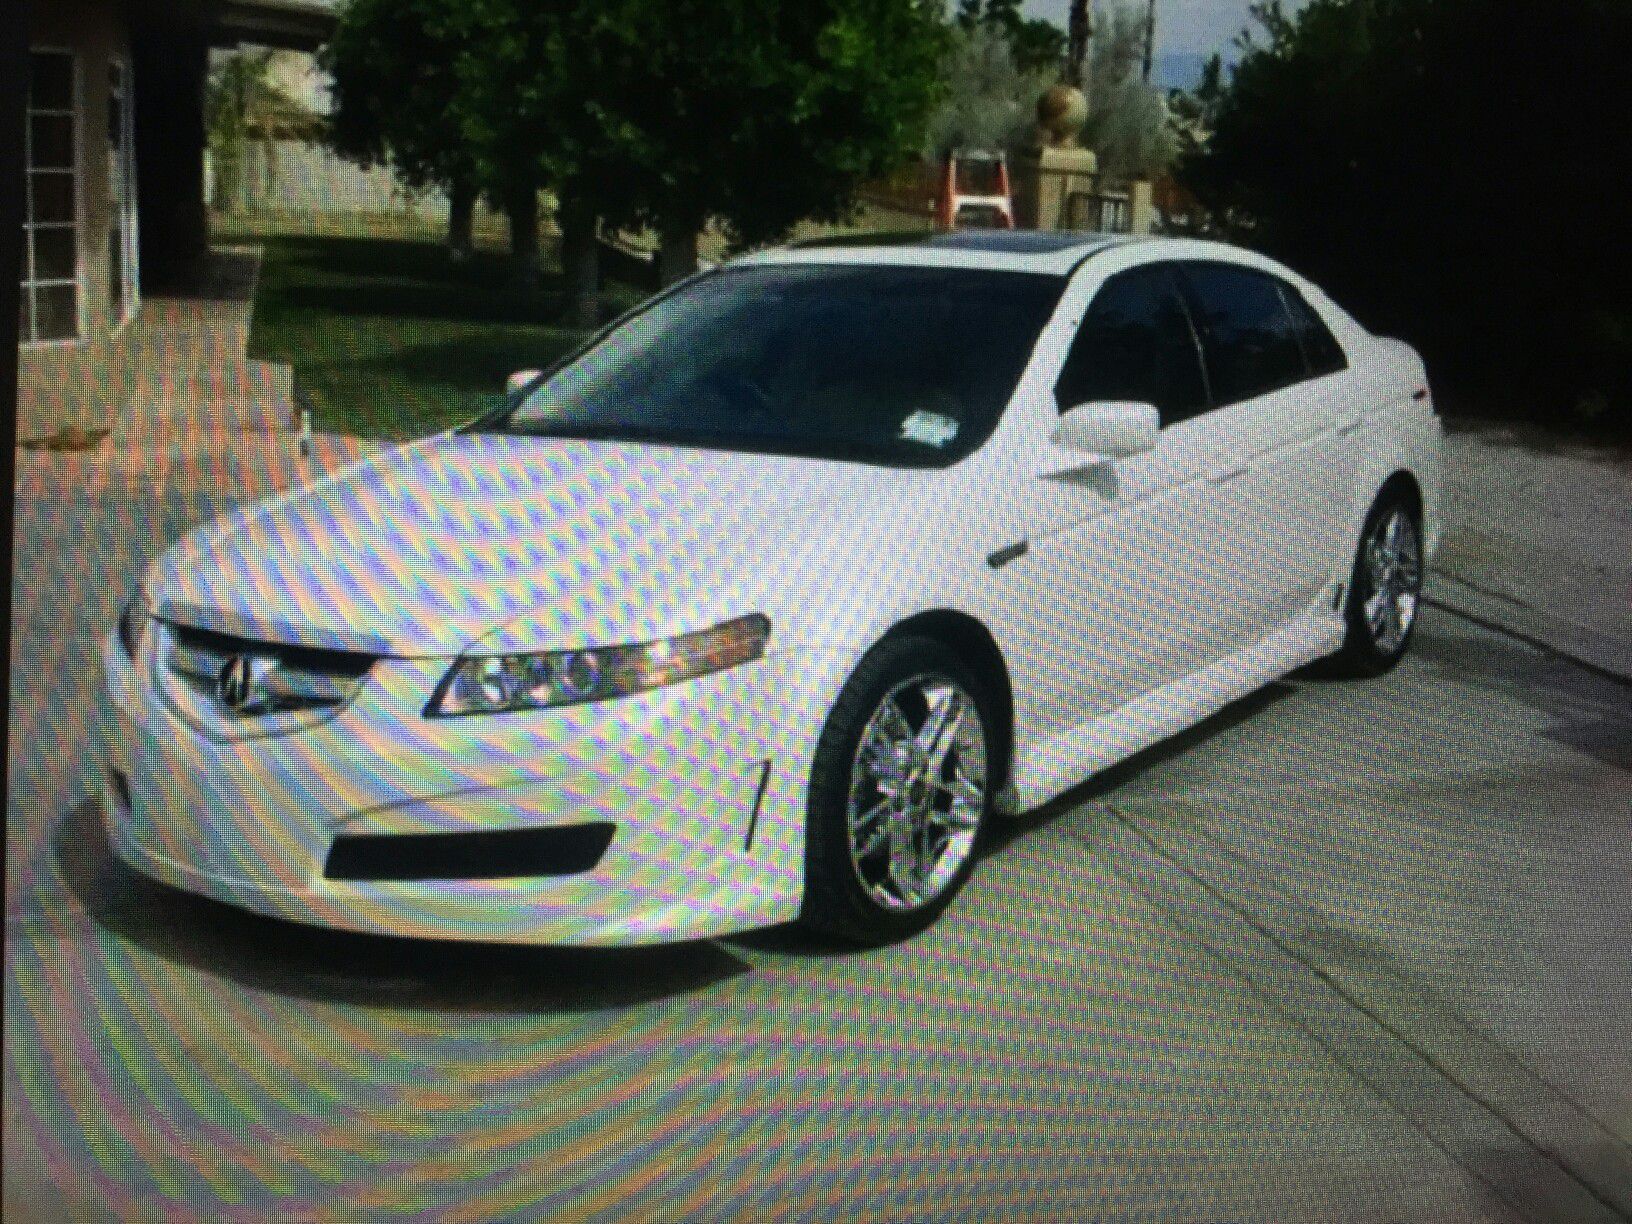 PremiumPackage••2005 Acura TL••More details and pics only here••kingmolly585@gmail .com•• please don’t ask in chat!! THANKS